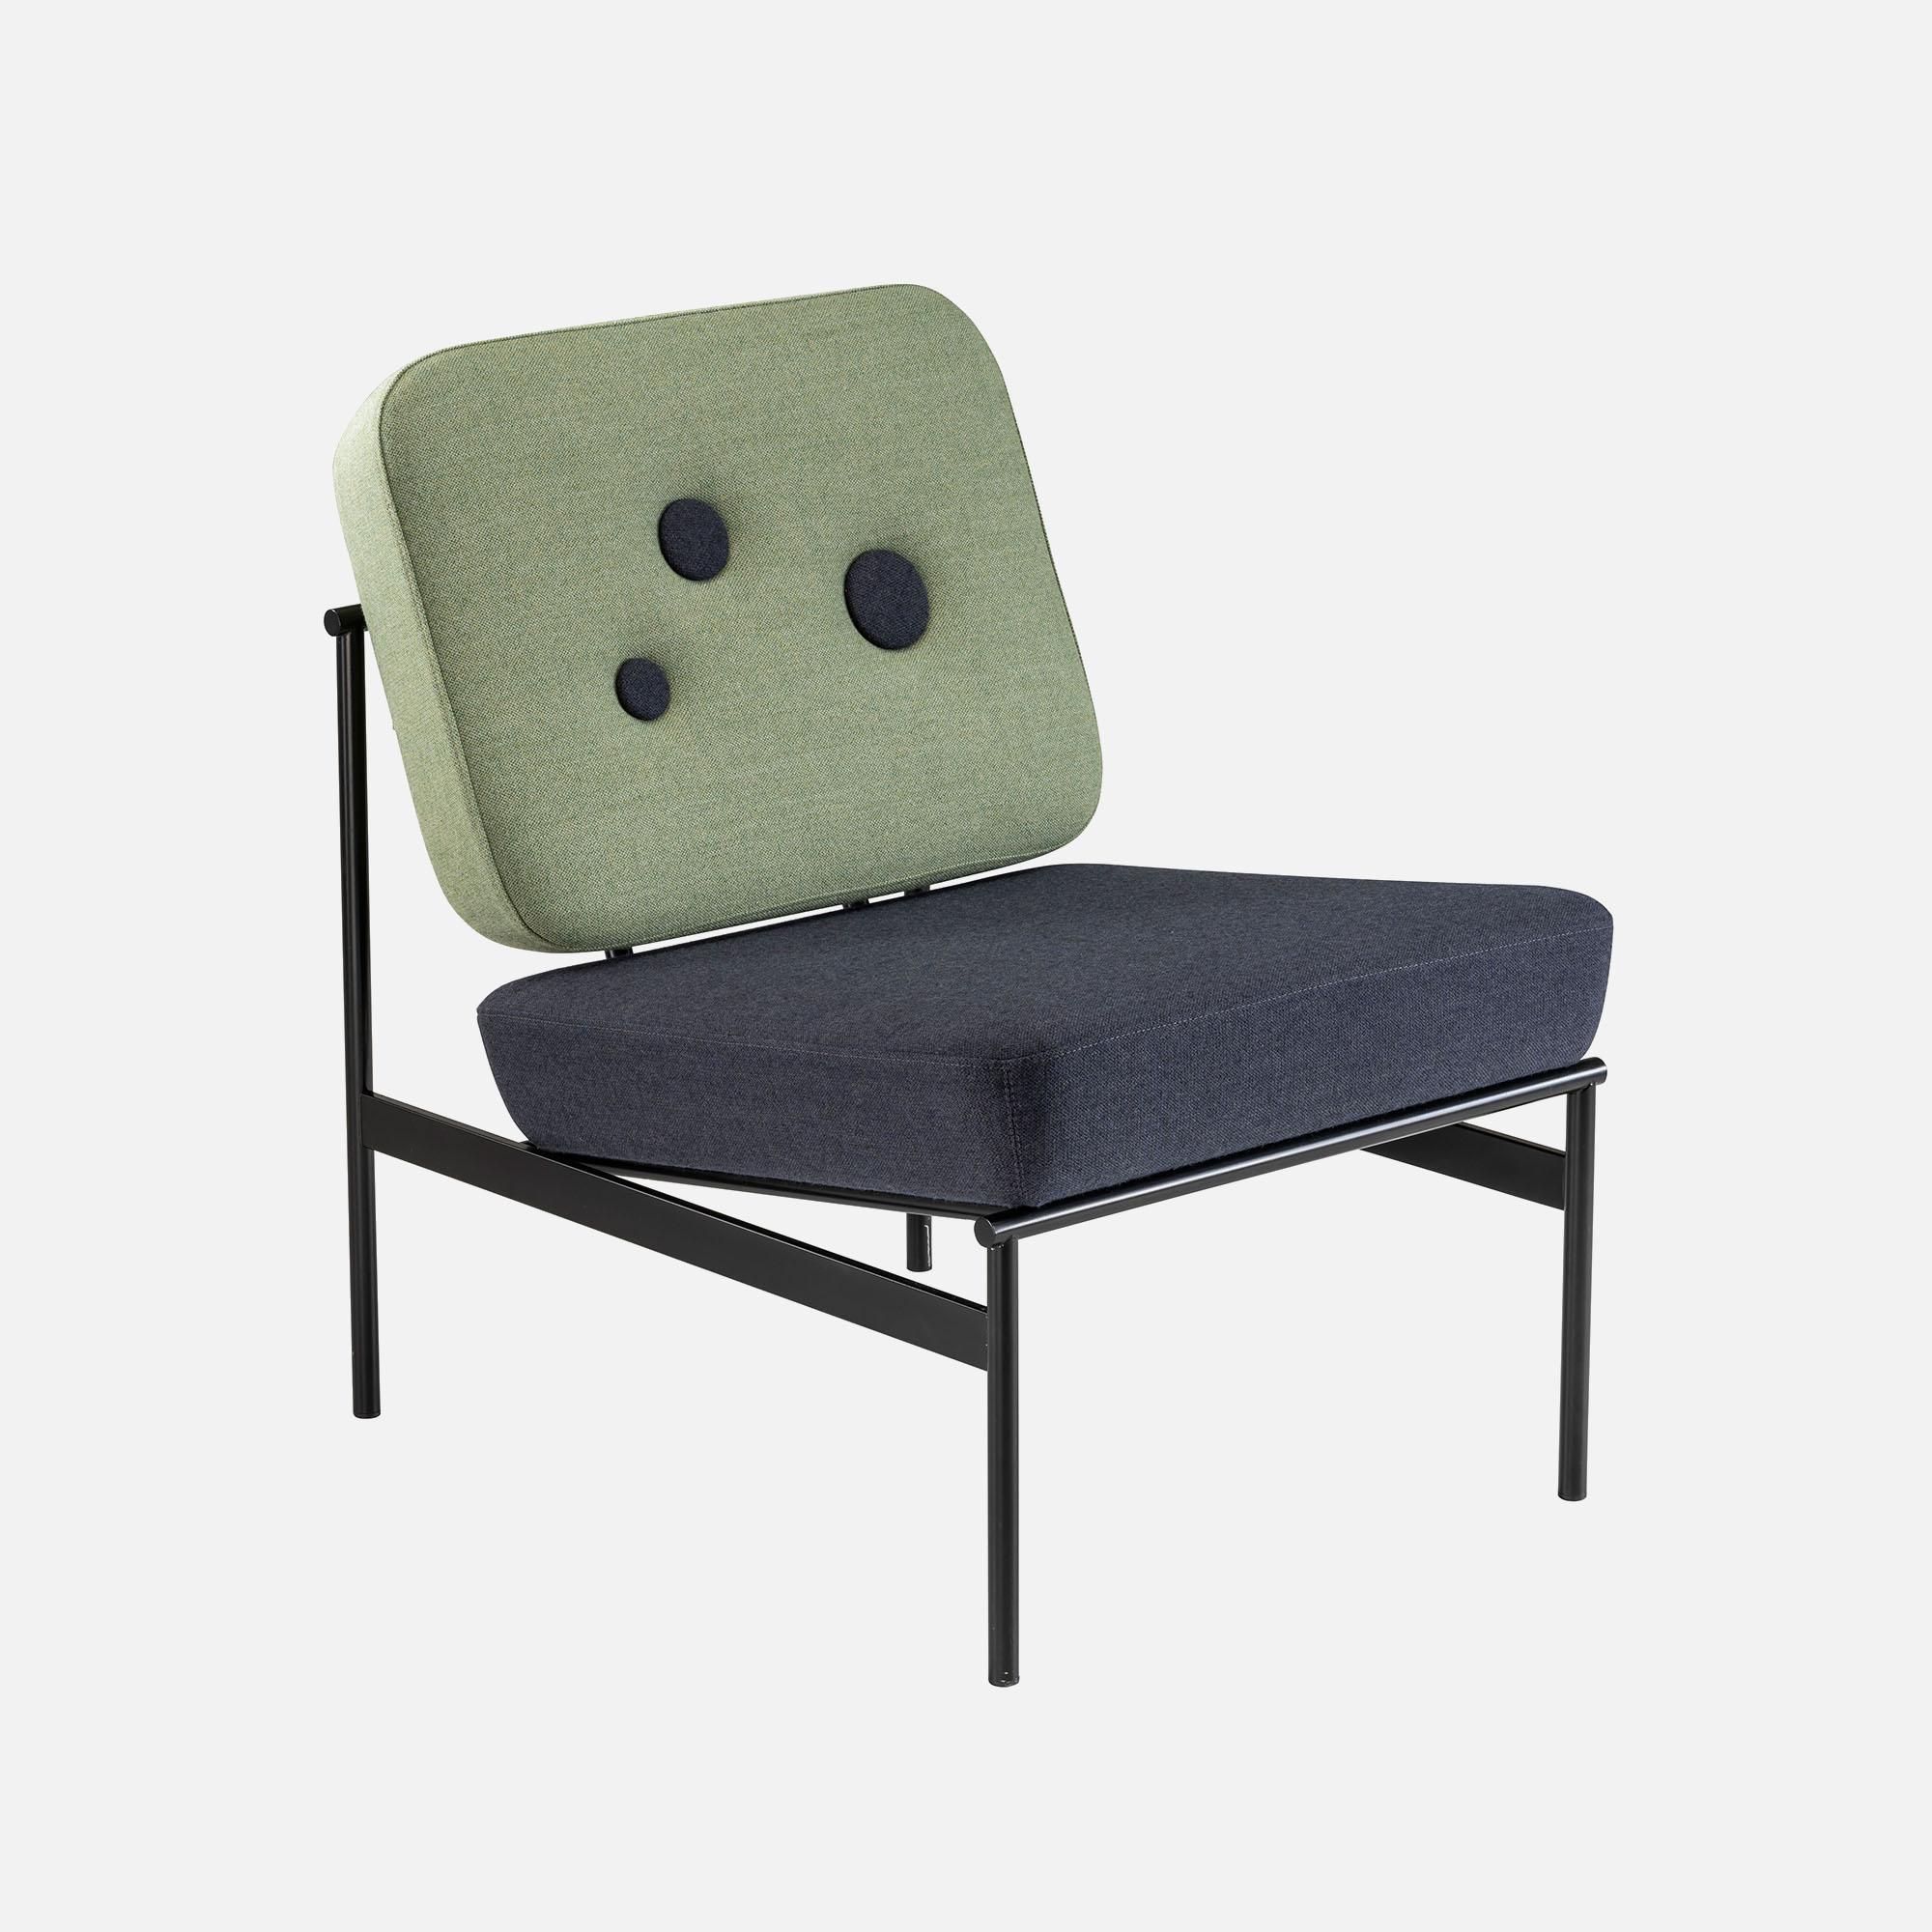 Dapple Lounge chair by Edvin Klasson
Dimensions: D55 x W74 x H78 cm
Materials: Powder coated steel, wooden frame with steel springs, cold foam and upholstery.
Options: The textile can be any upholstery textile from Kvadrat and the seat and back